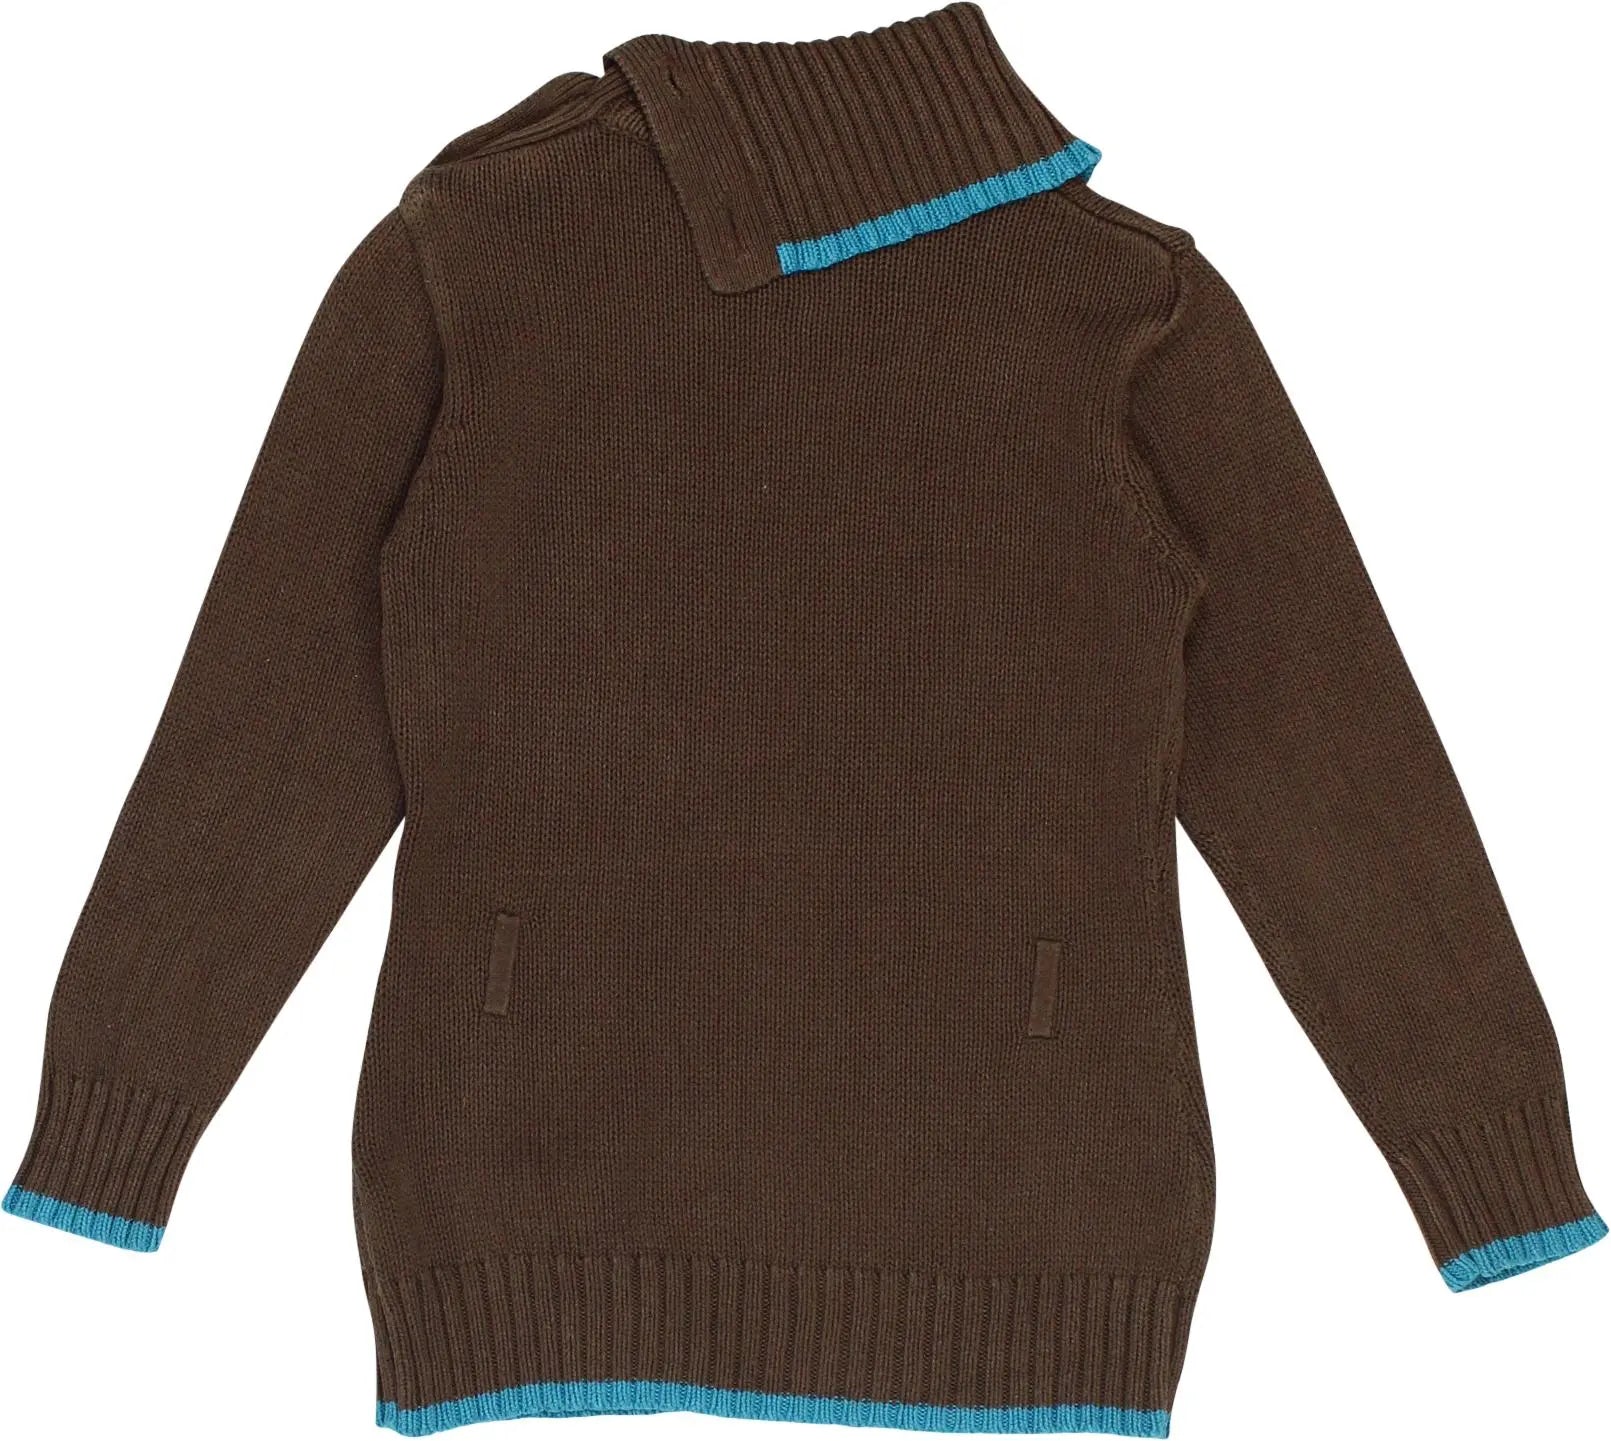 Unknown - Brown Knitted Jumper- ThriftTale.com - Vintage and second handclothing